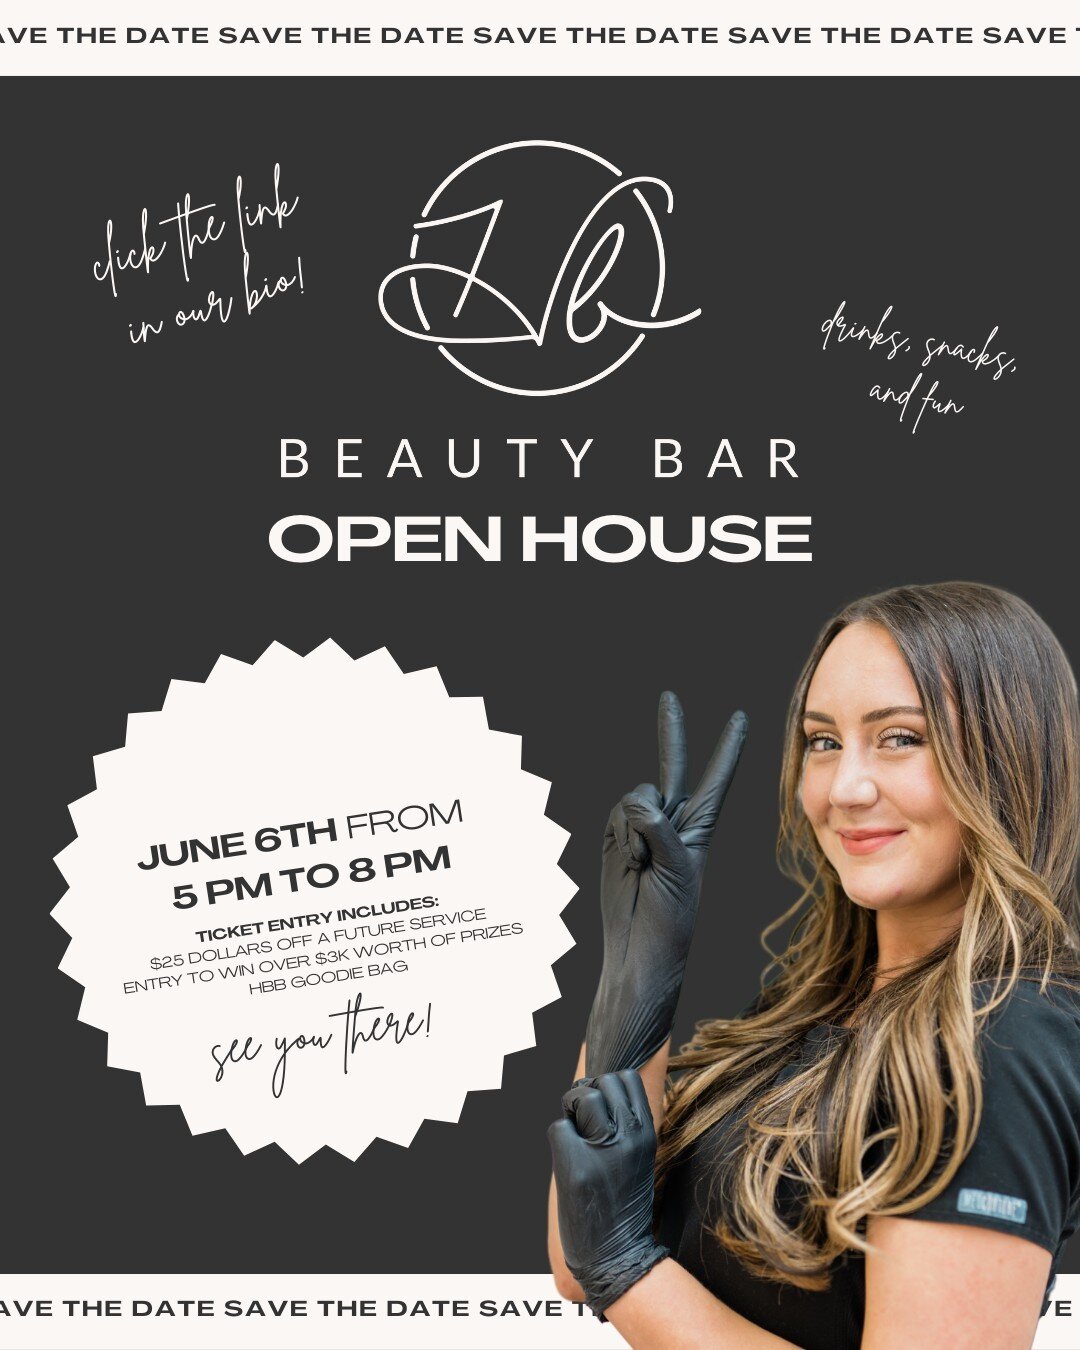 ⁠
Who's ready to celebrate!? 🥂🪩⁠
⁠
Join us at Hess Beauty Bar on Tuesday, June 6th from 5 to 8 PM for our FIRST open house event!⁠
⁠
Ticket entry includes: ⁠
HBB goodie bag 🛍️⁠
$25 dollars off a future service 💸⁠
and entry to win over $3K worth o